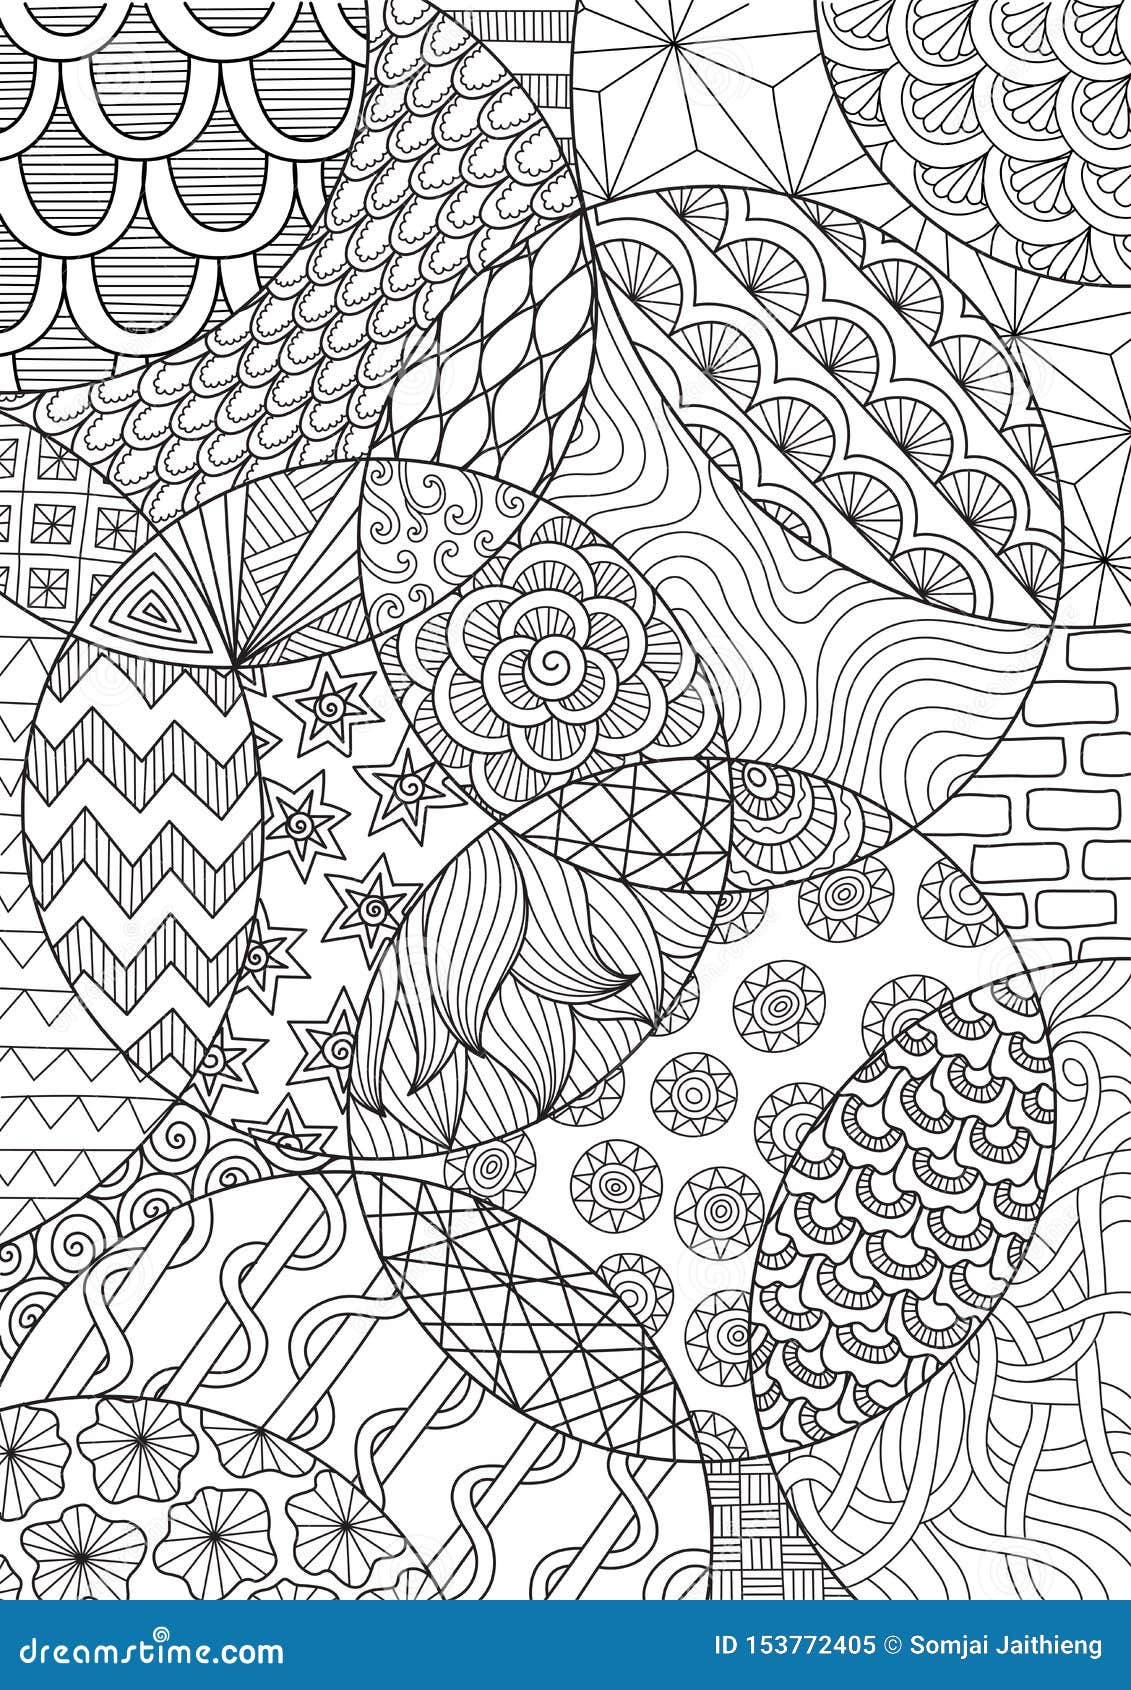 https://thumbs.dreamstime.com/z/circle-abstract-line-art-drawing-background-adult-coloring-book-page-vector-illustration-153772405.jpg